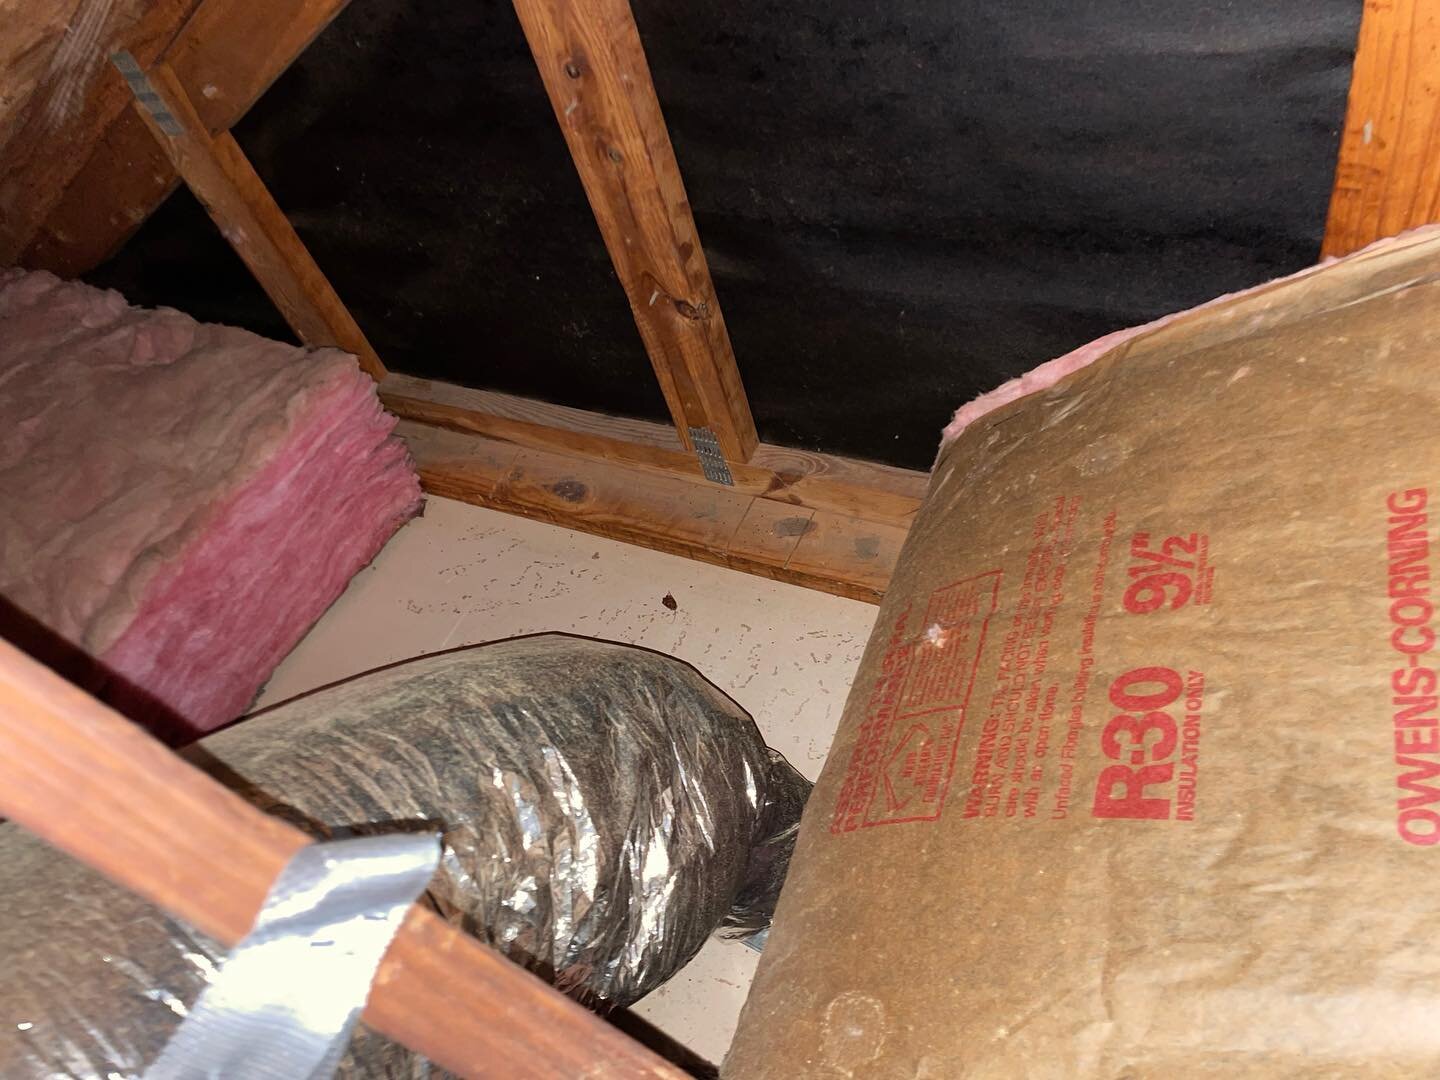 Can you list the many problems in this attic?? #wecanfixthat #insulation #attic #homeperformance #performancematters #thatsnotgood